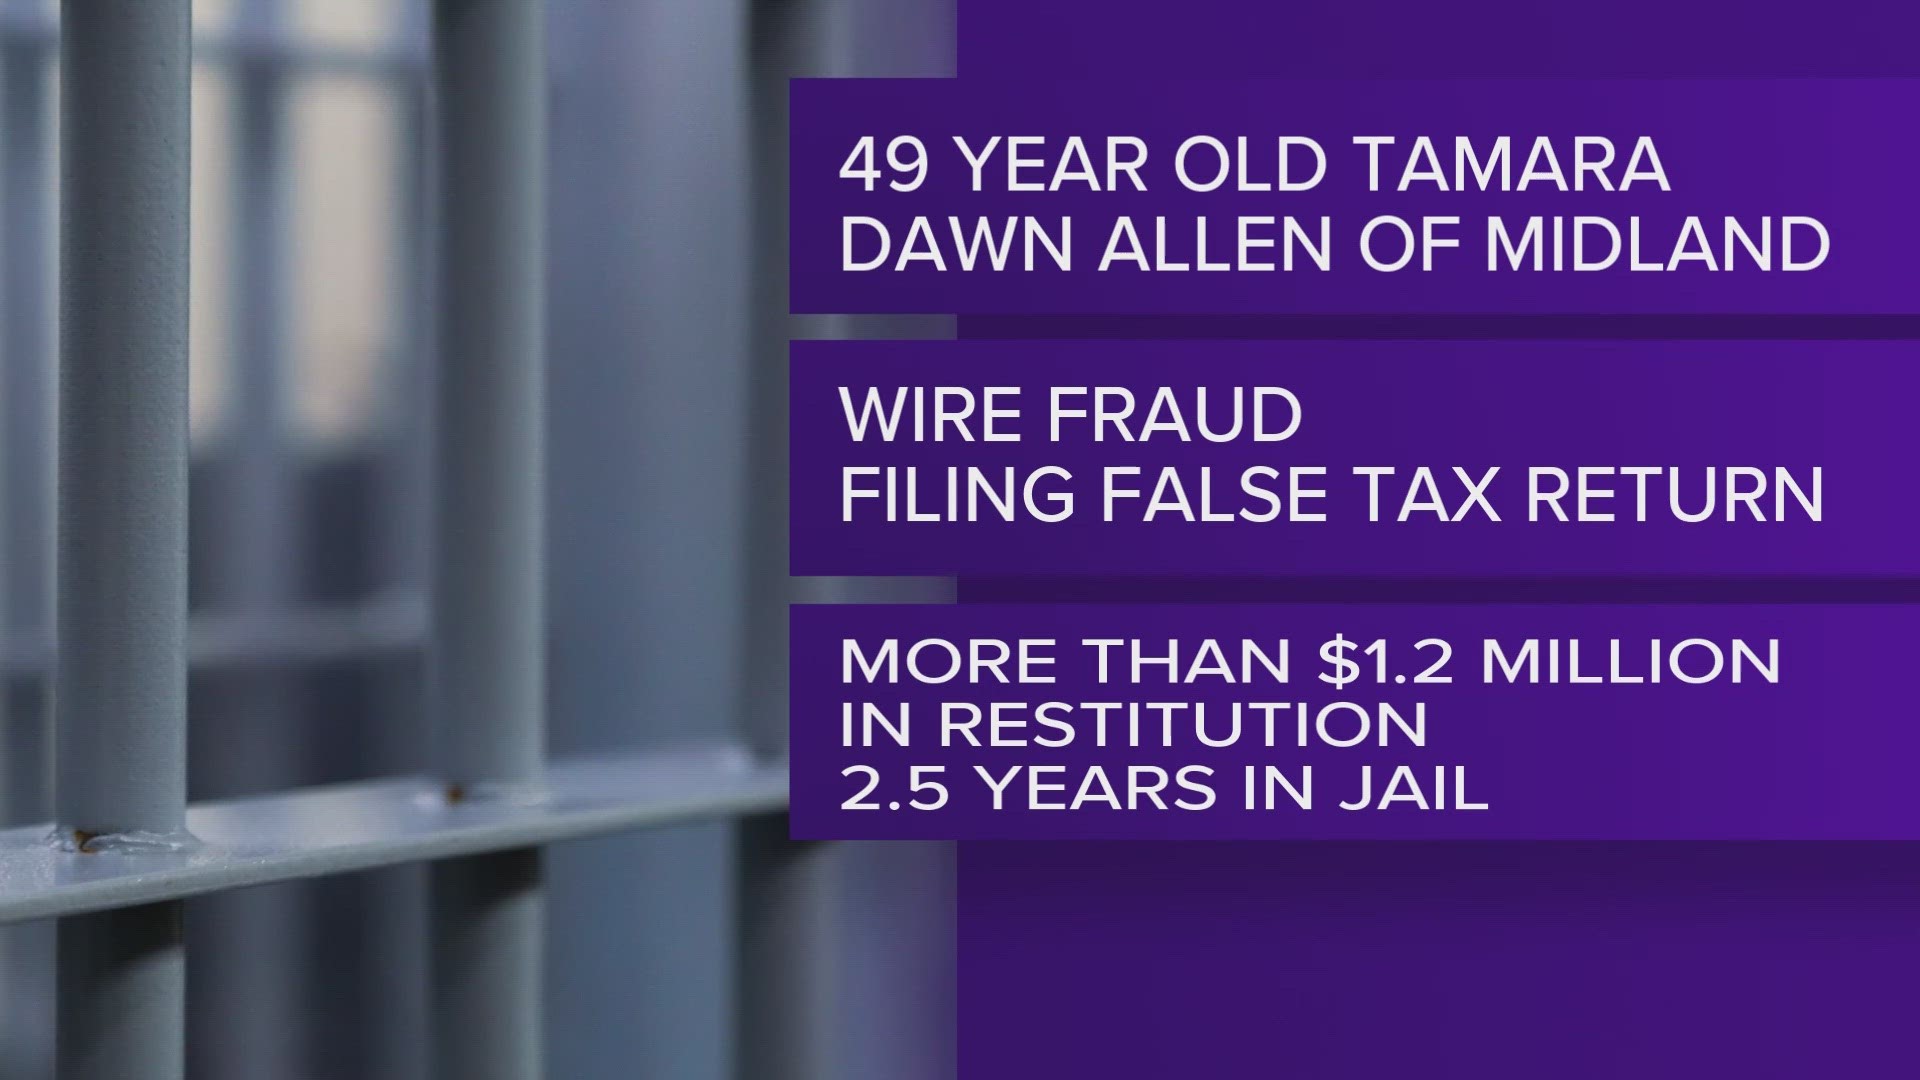 As a secretary for Bridges Equipment, LTD, Tamara Dawn Allen illegally cashed her employer's checks using the owner's signature stamp, court documents report.